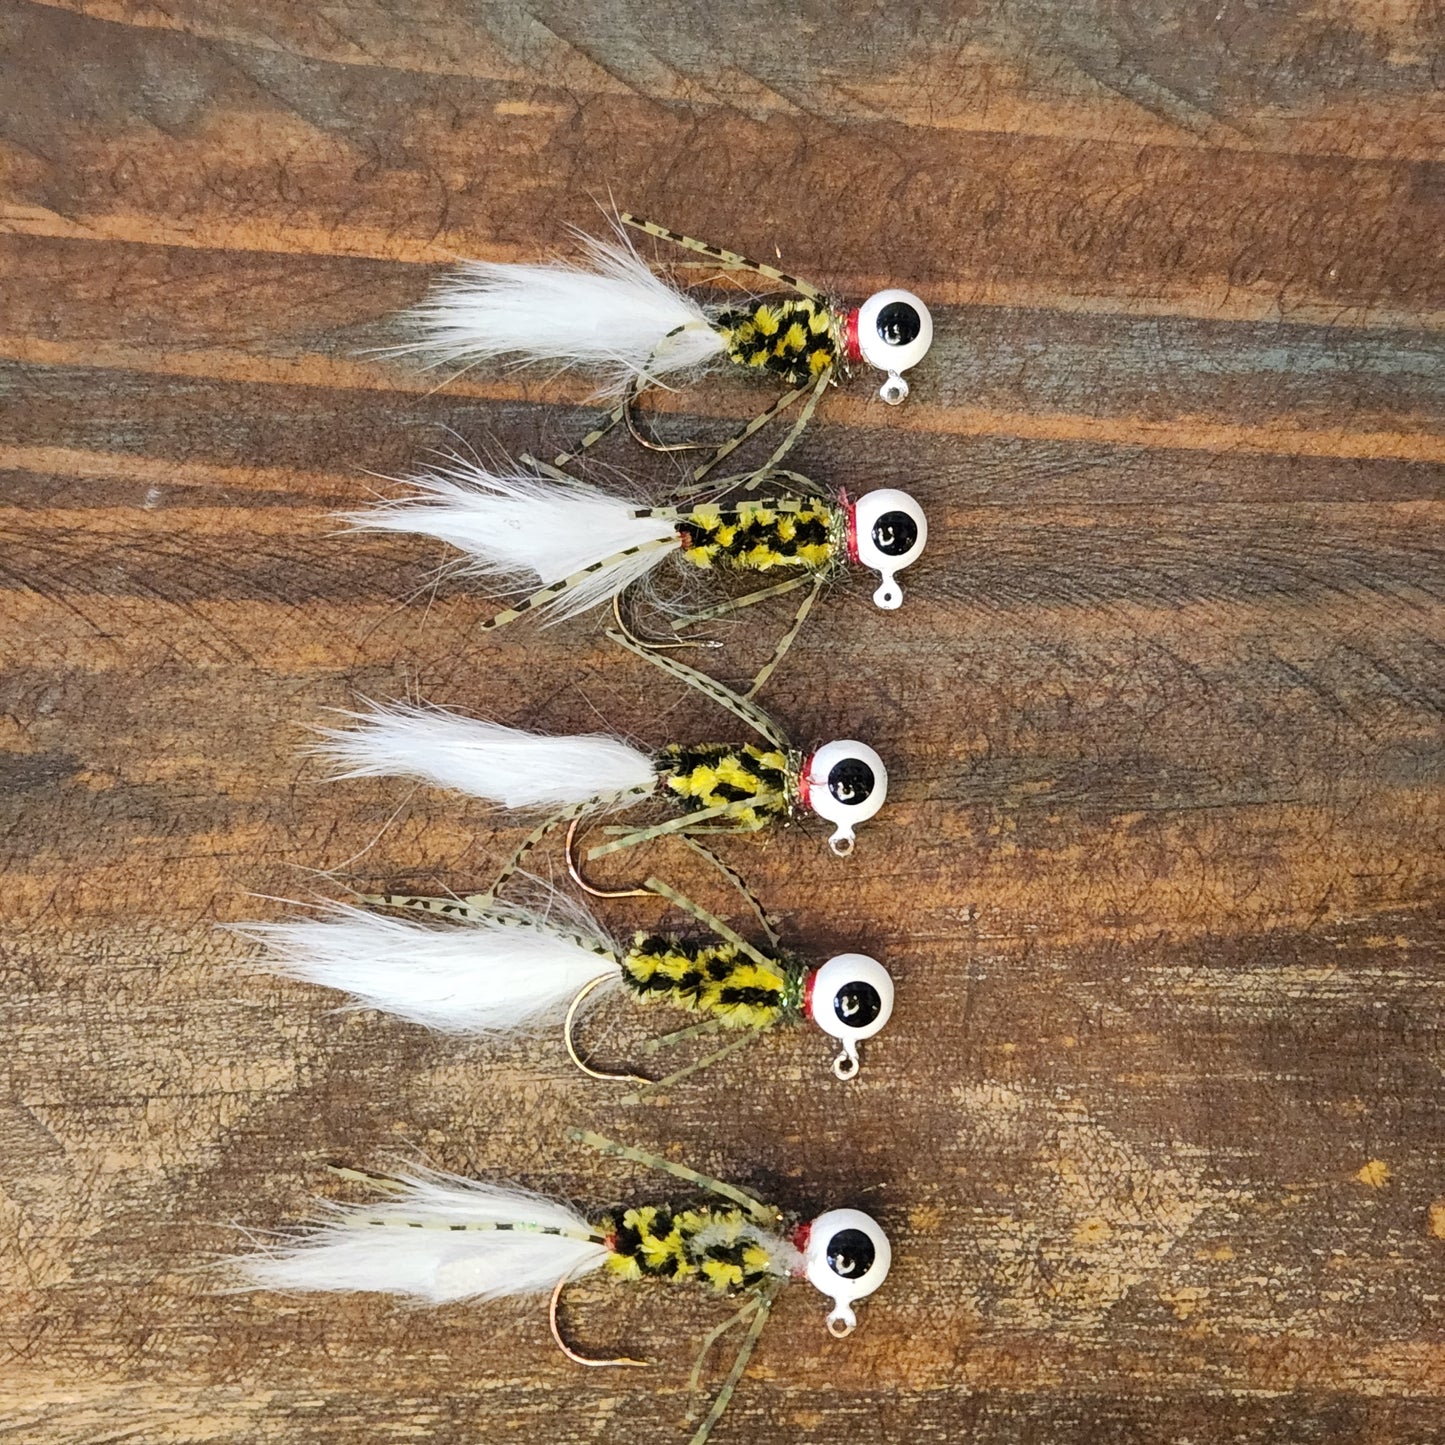 5 pack of the "Crappie Crawler" 1/16 or 1/8 ounce Crappie Jigs, Hand tied.